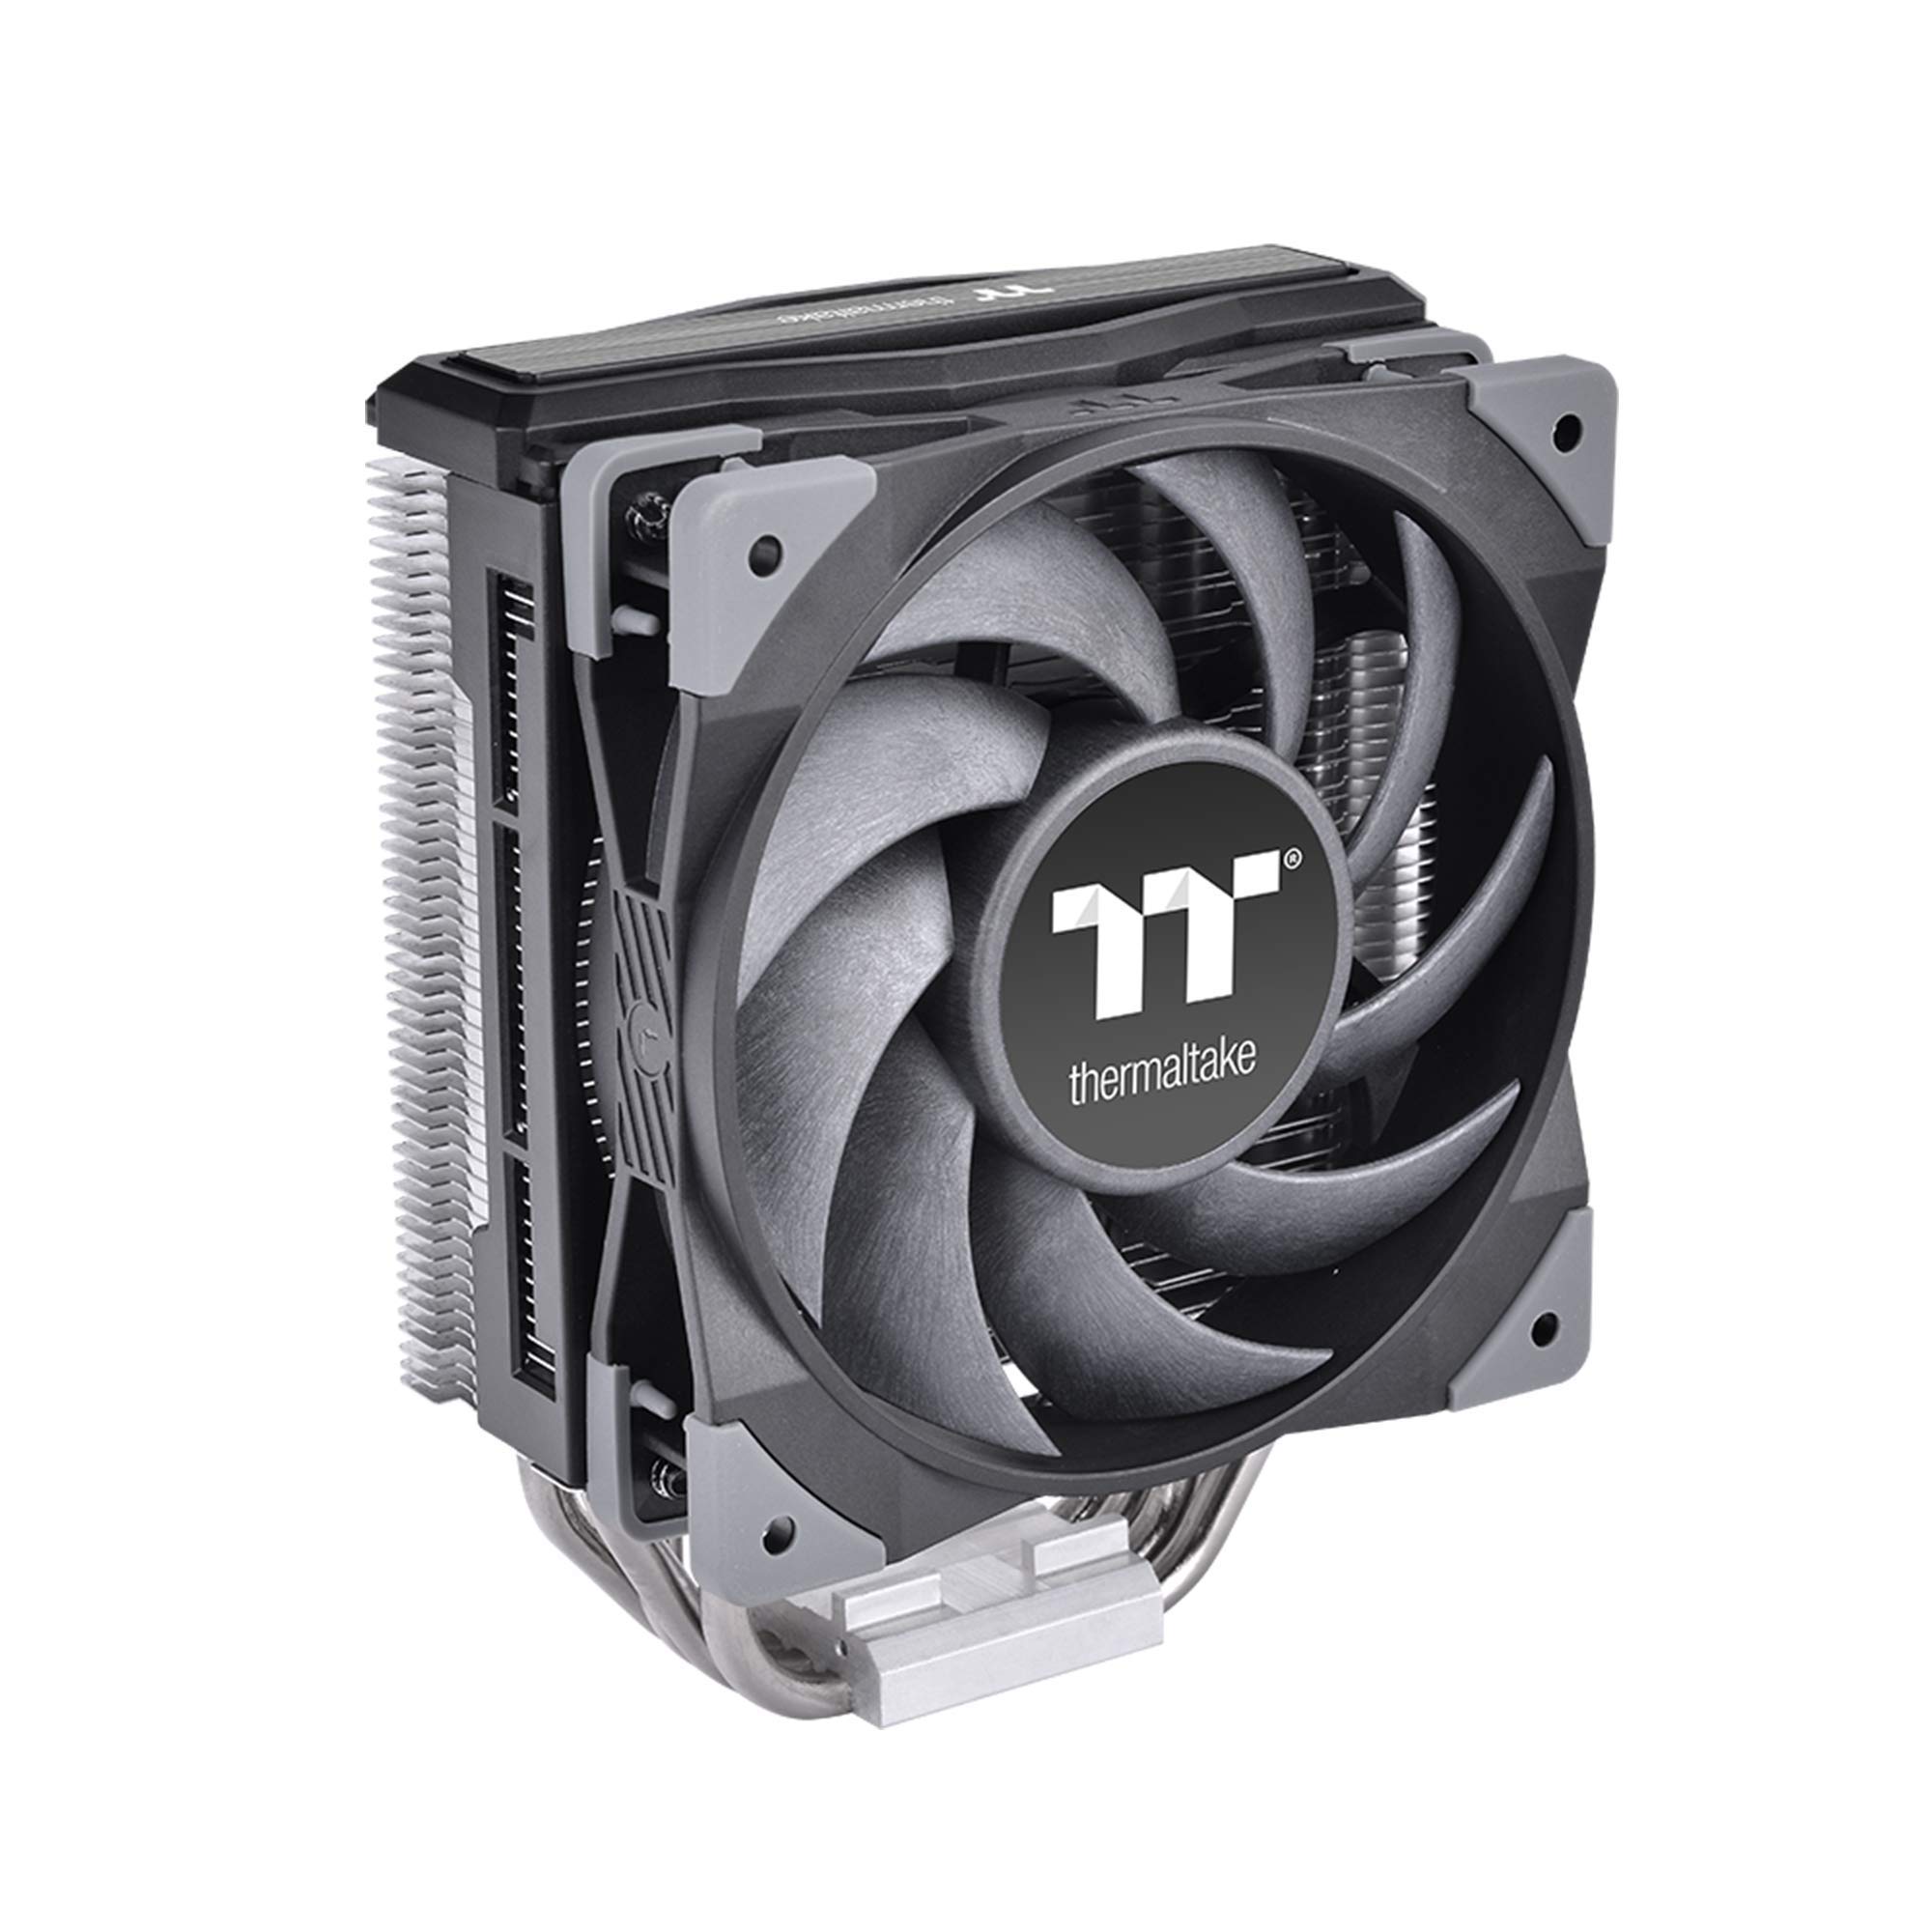 Thermaltake TOUGHAIR 310 170W TDP Intel/AMD Universal Socket CPU Cooler (CL-P074-AL12BL-A) $25 + Free Shipping w/ Prime or on $25+